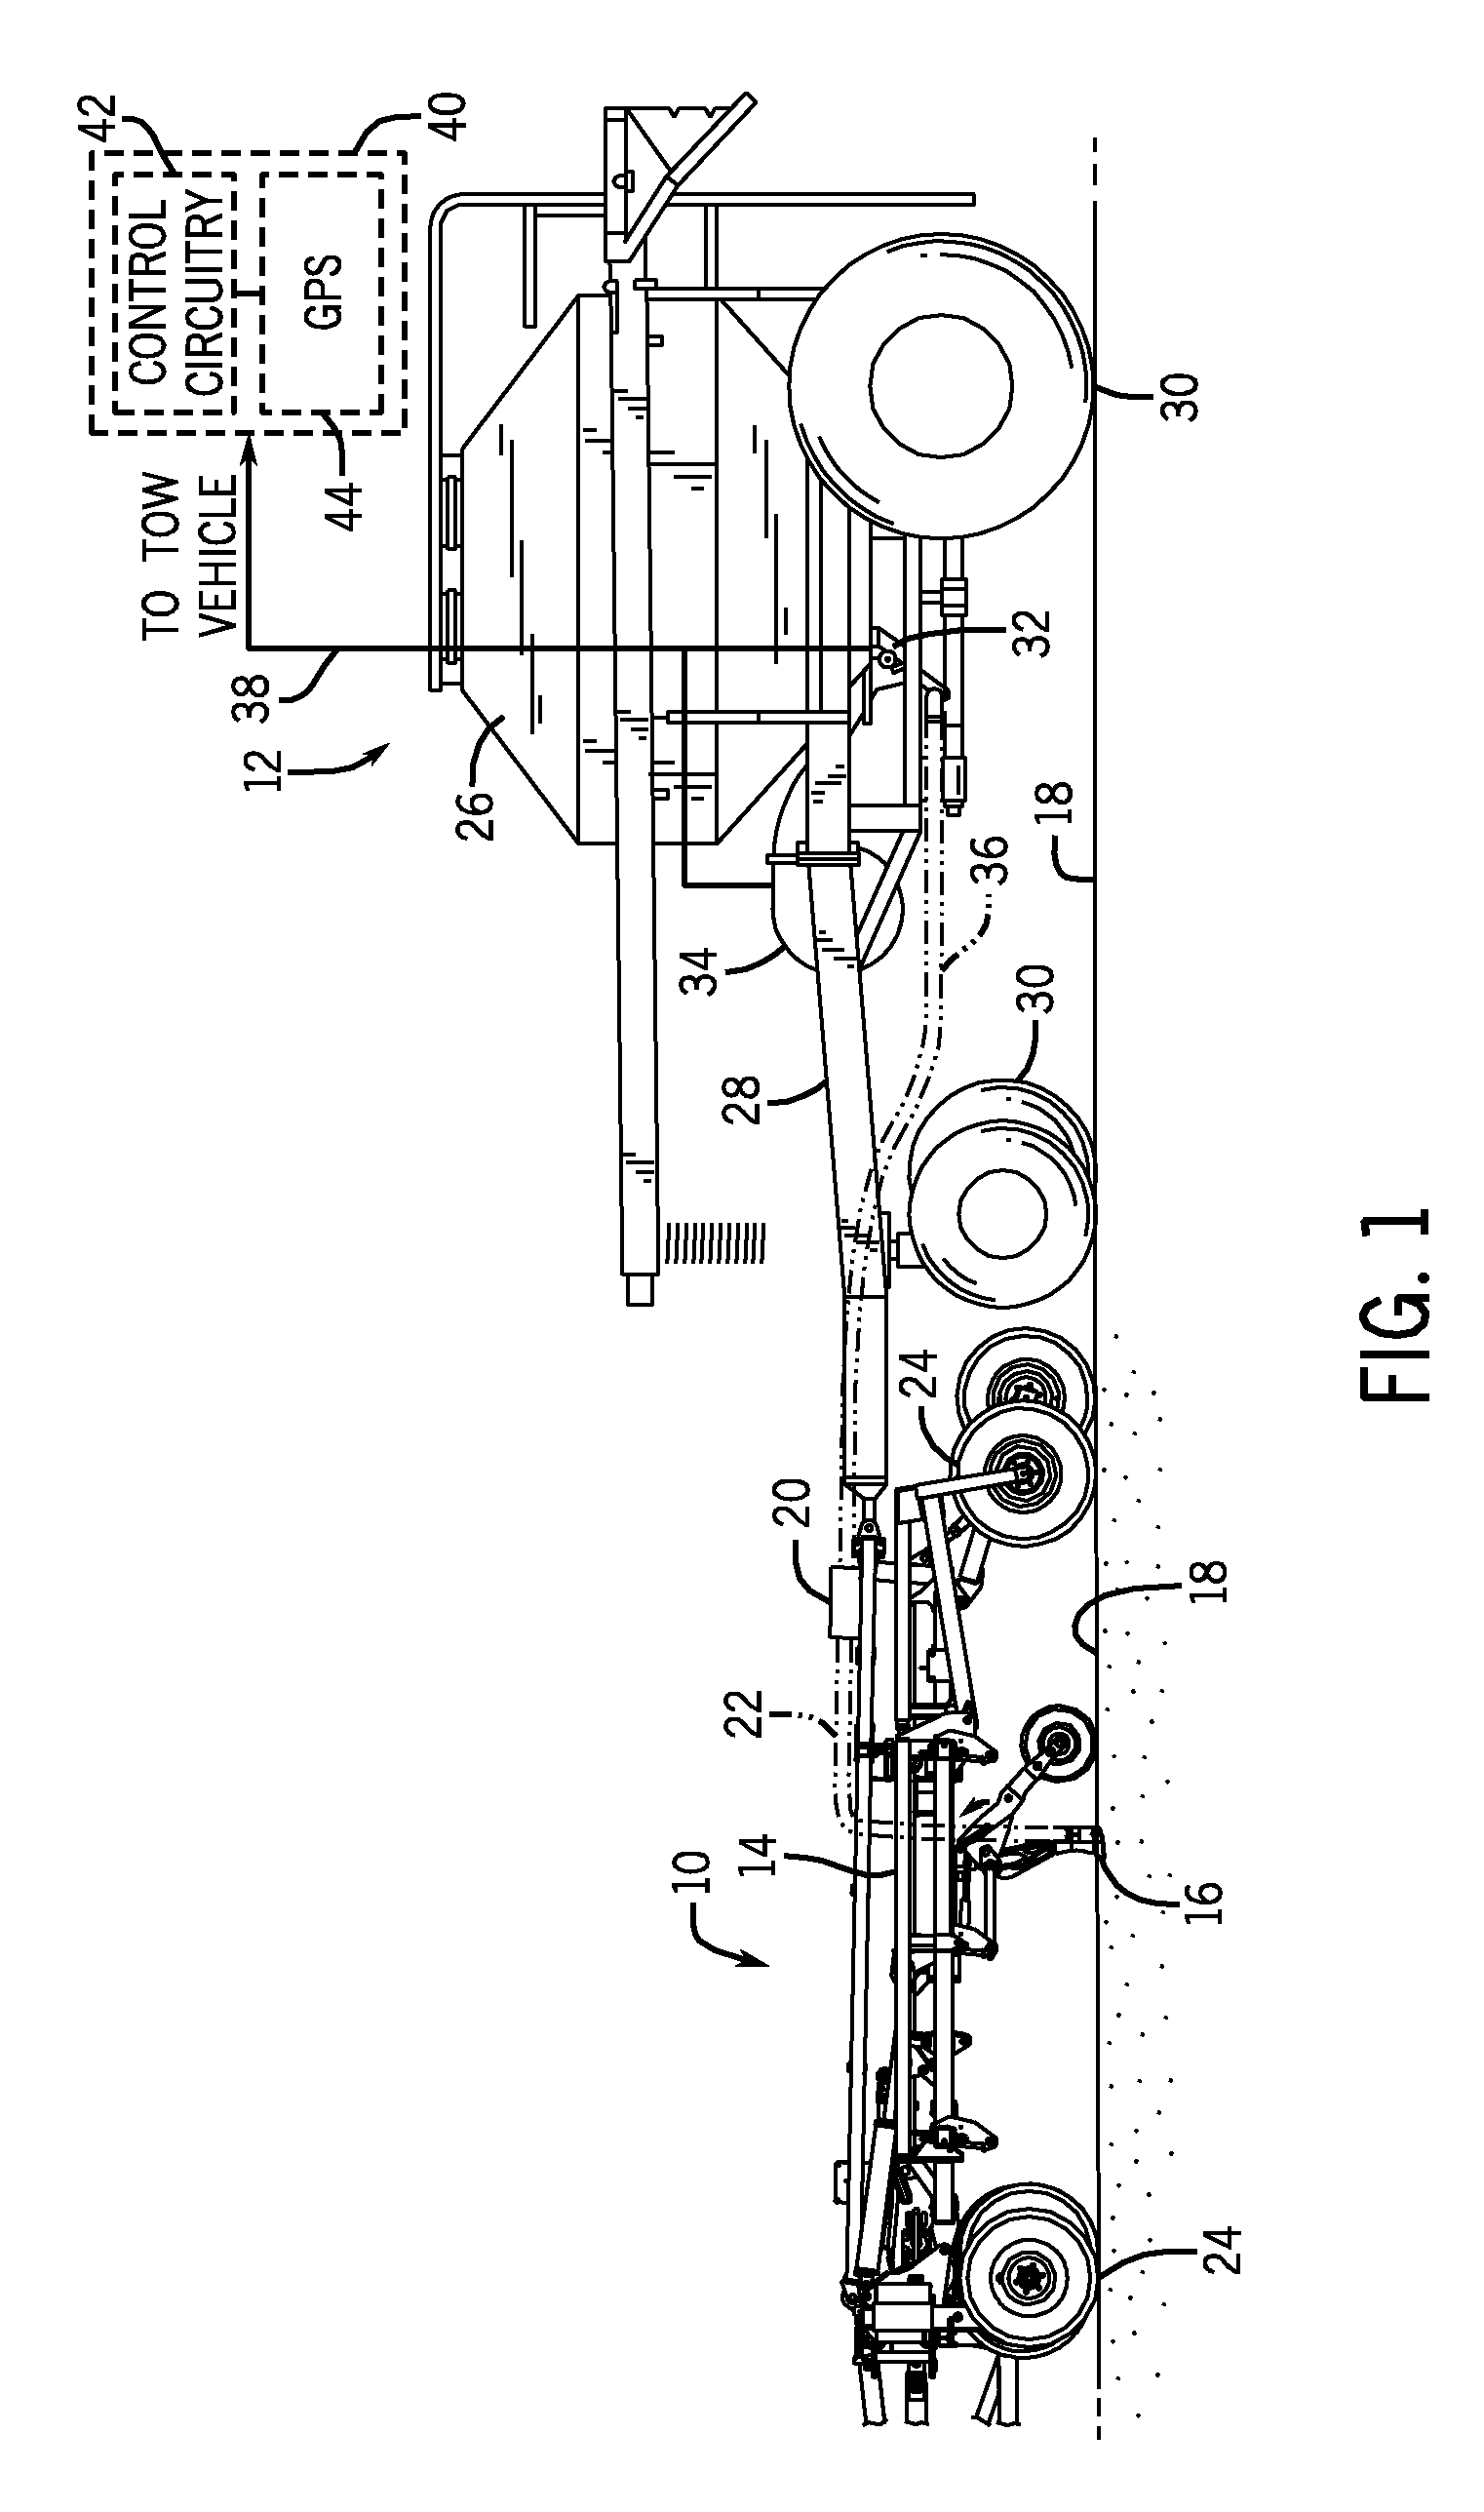 Sectioned metering system and method